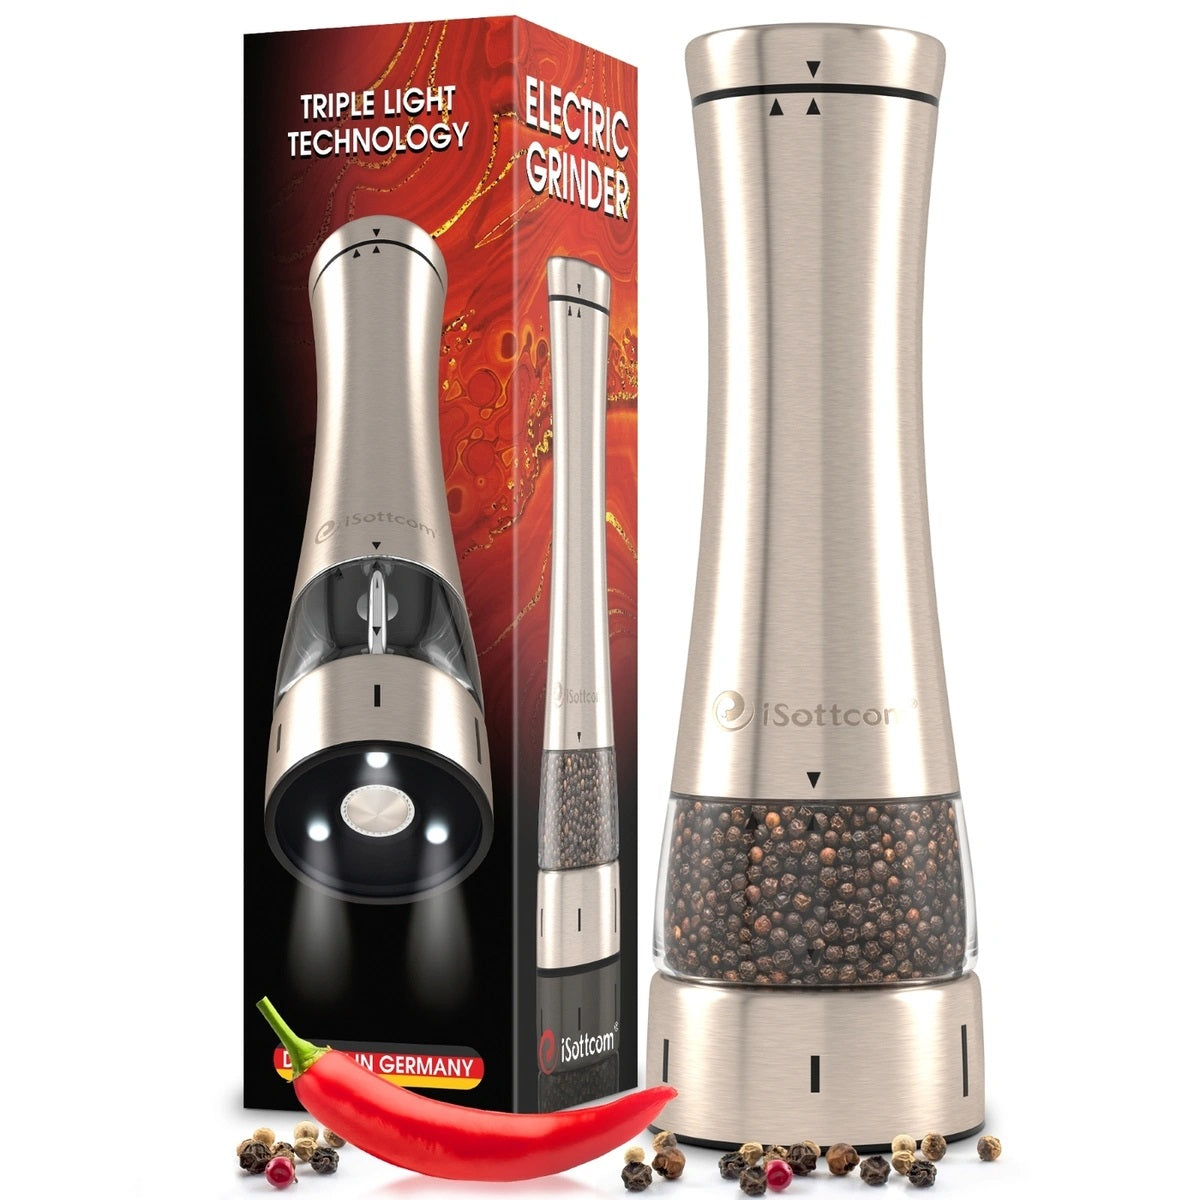 Morphy Richards Accents Electronic Salt and Pepper Shaker Set